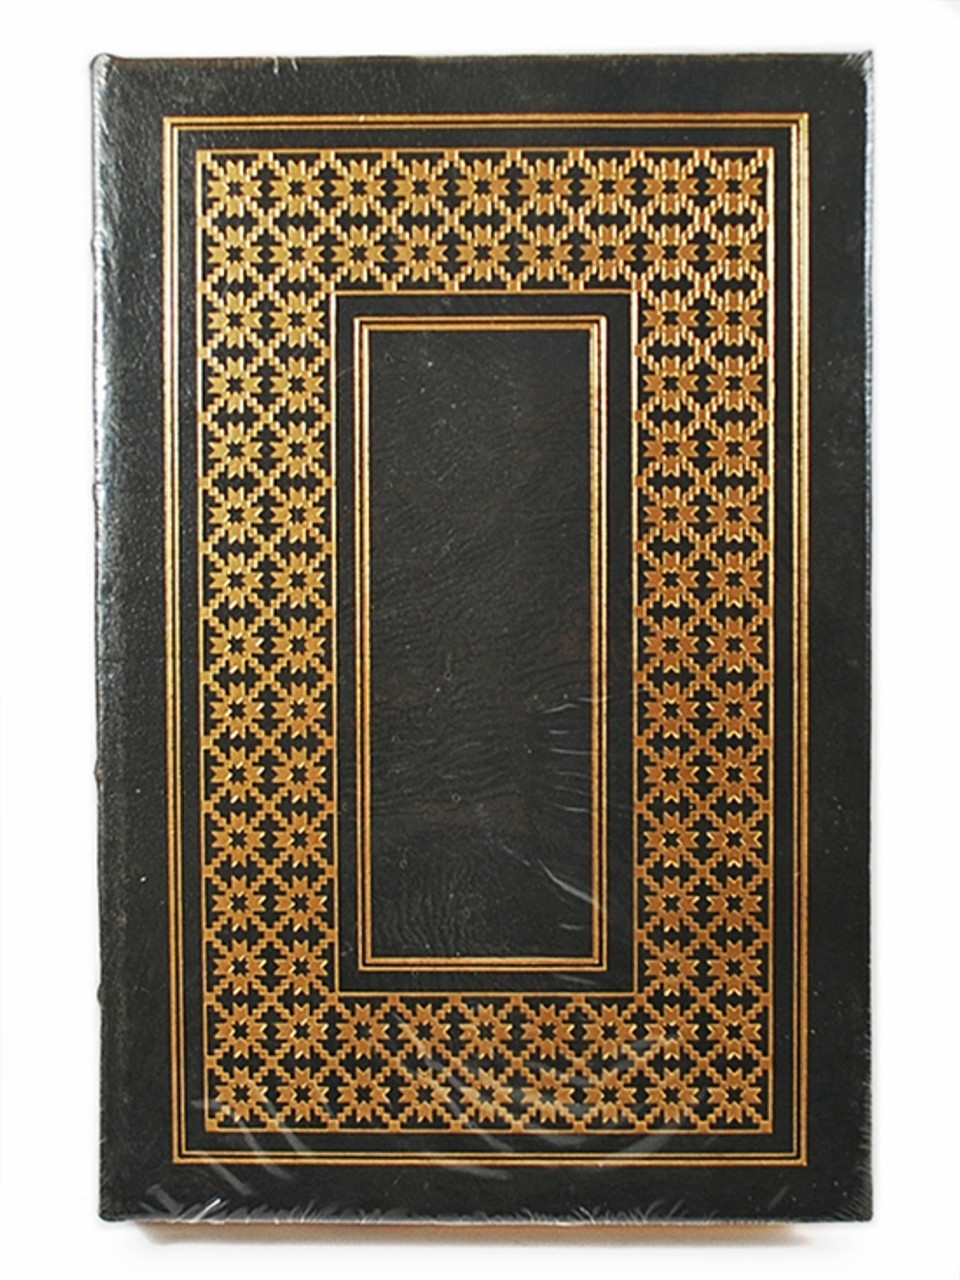 Easton Press, Charles Frazier "Cold Mountain" Signed Limited Edition, Leather Bound Collector's Edition w/COA